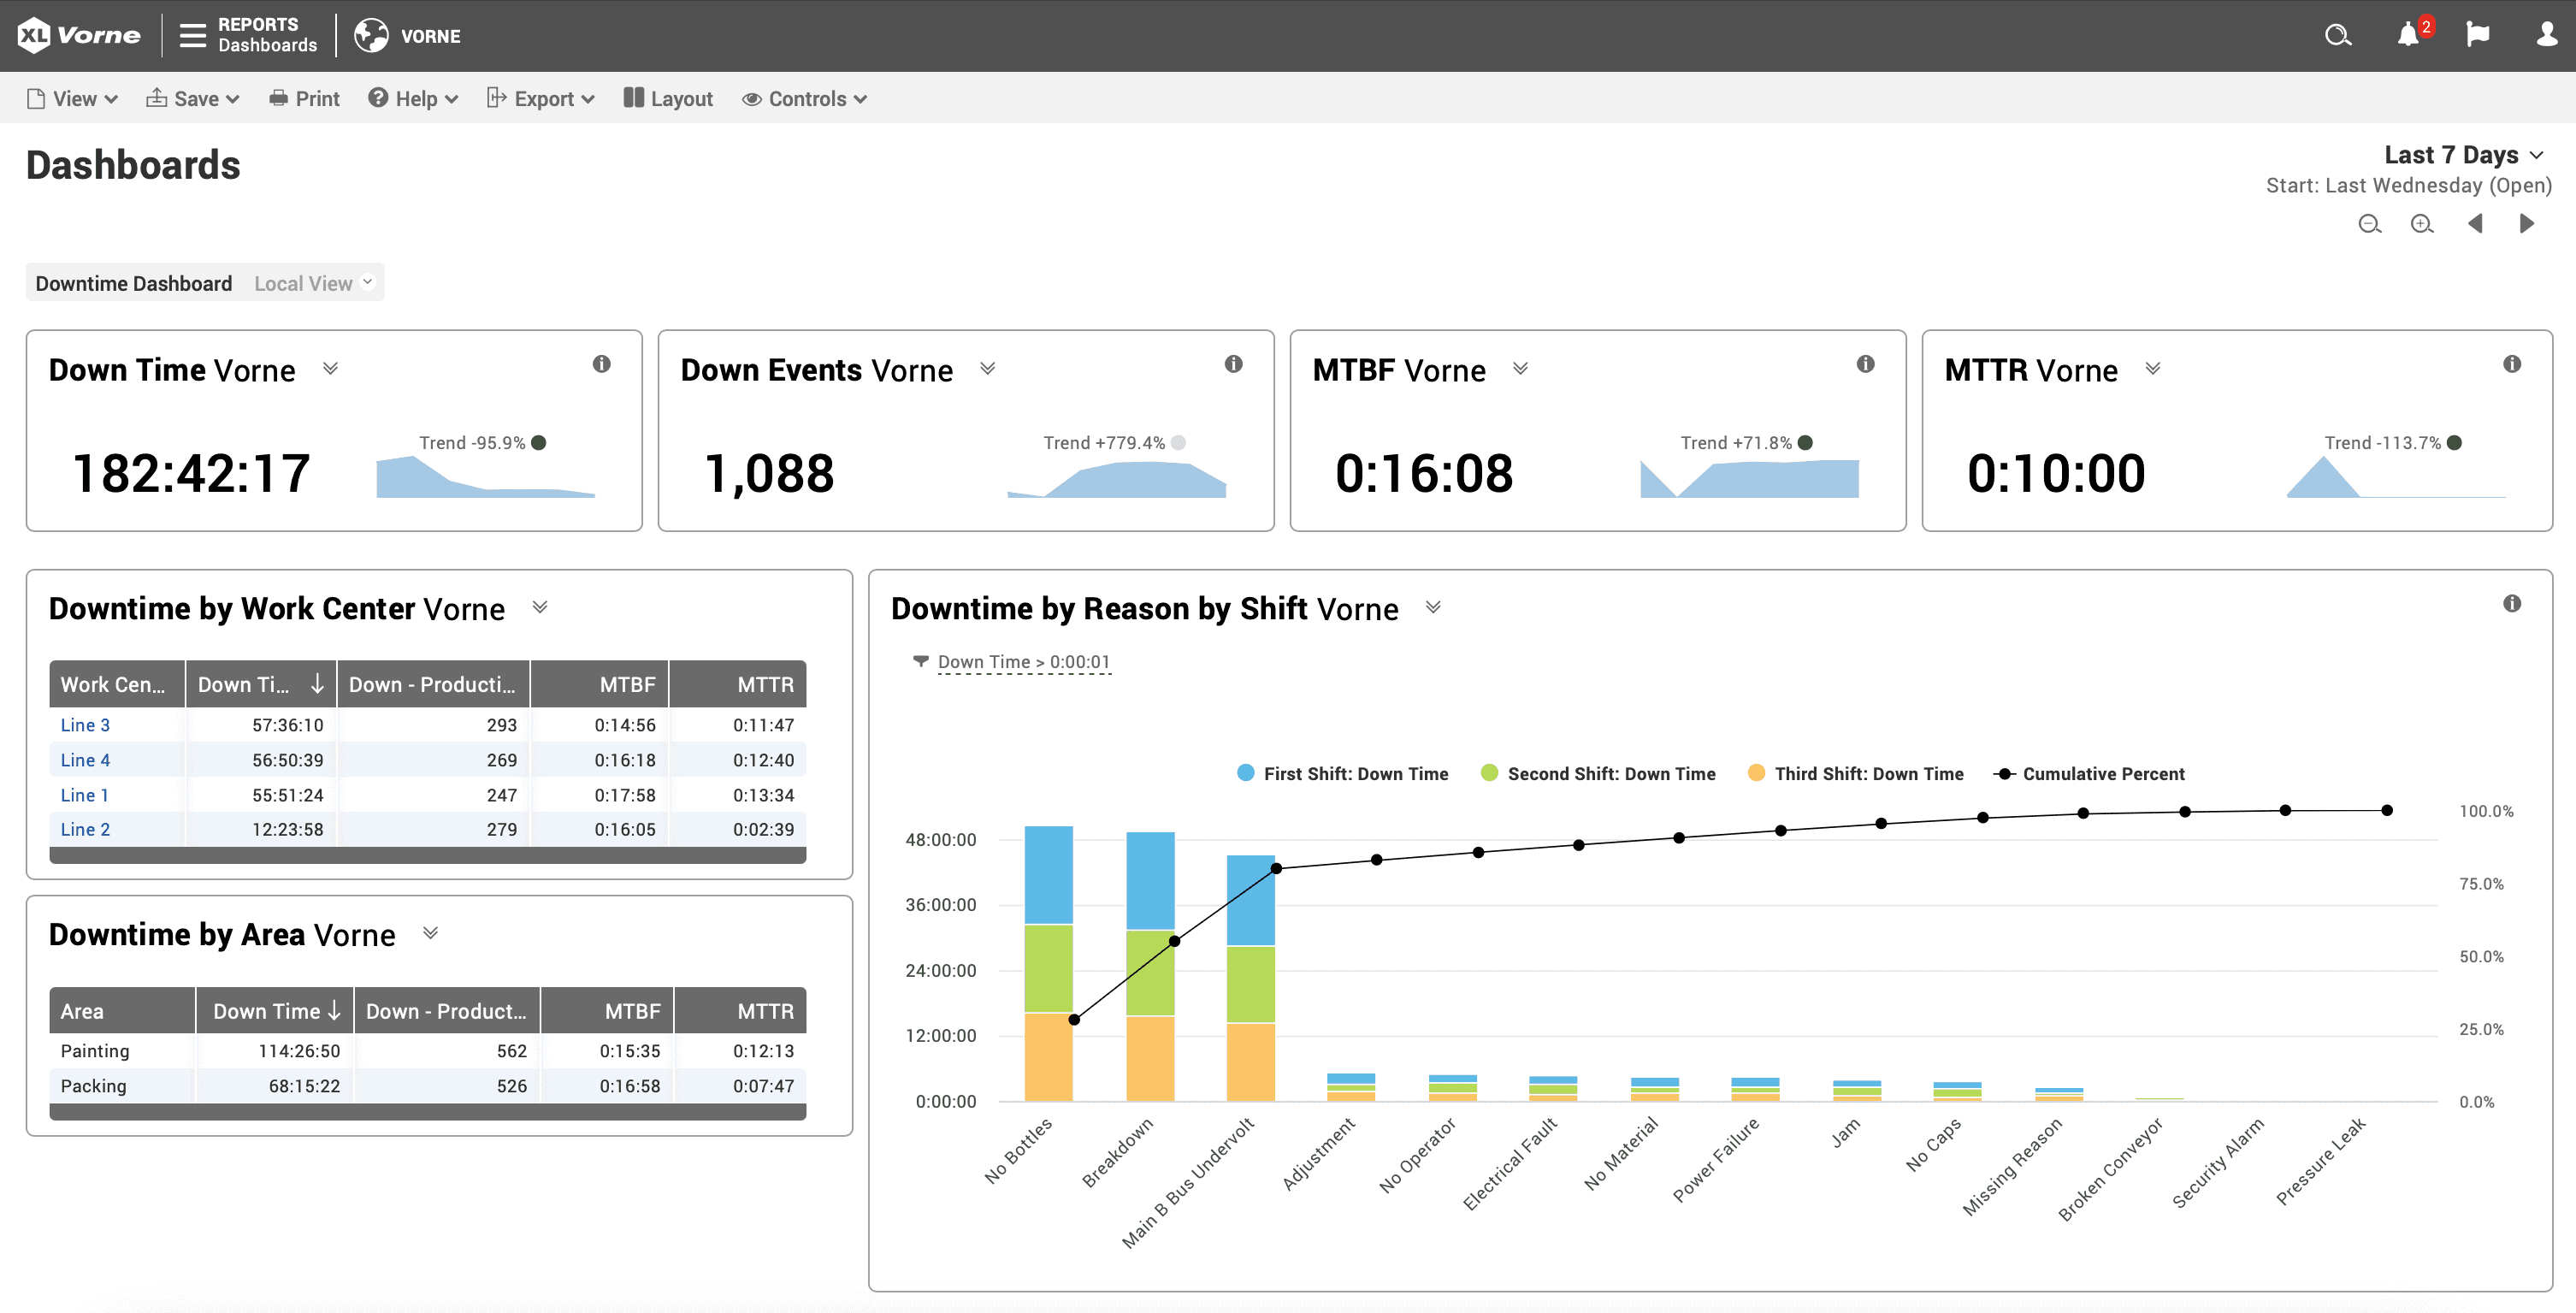 Screen capture of a downtime dashboard created with Vorne XL.